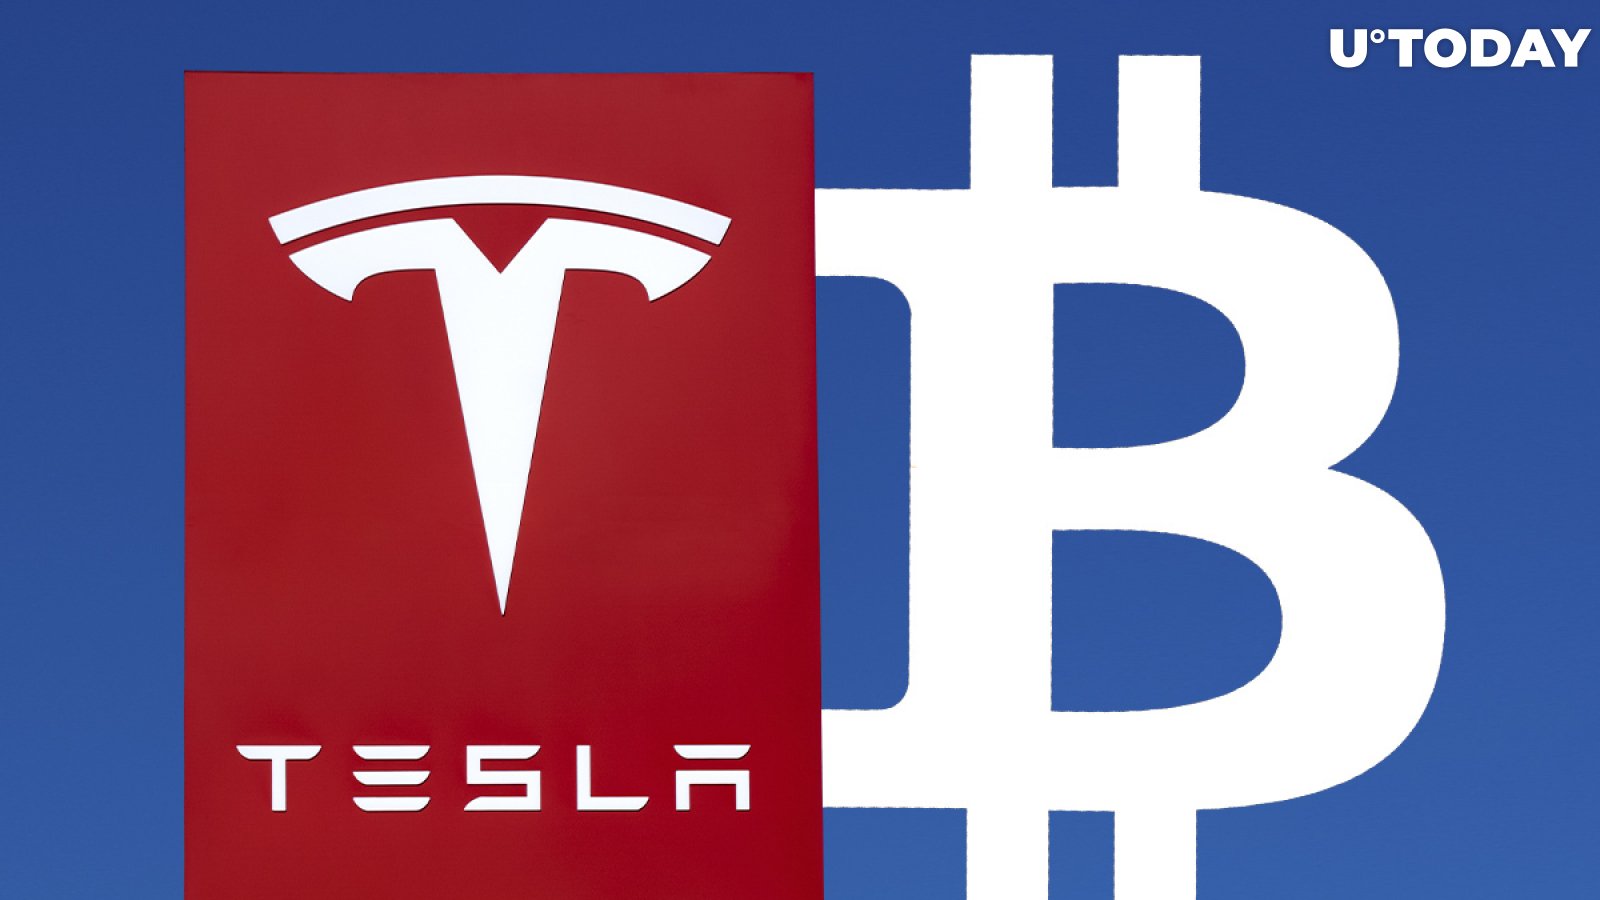 Bitcoin and Tesla Stock Likely to Halve in Value: Deutsche Bank Survey